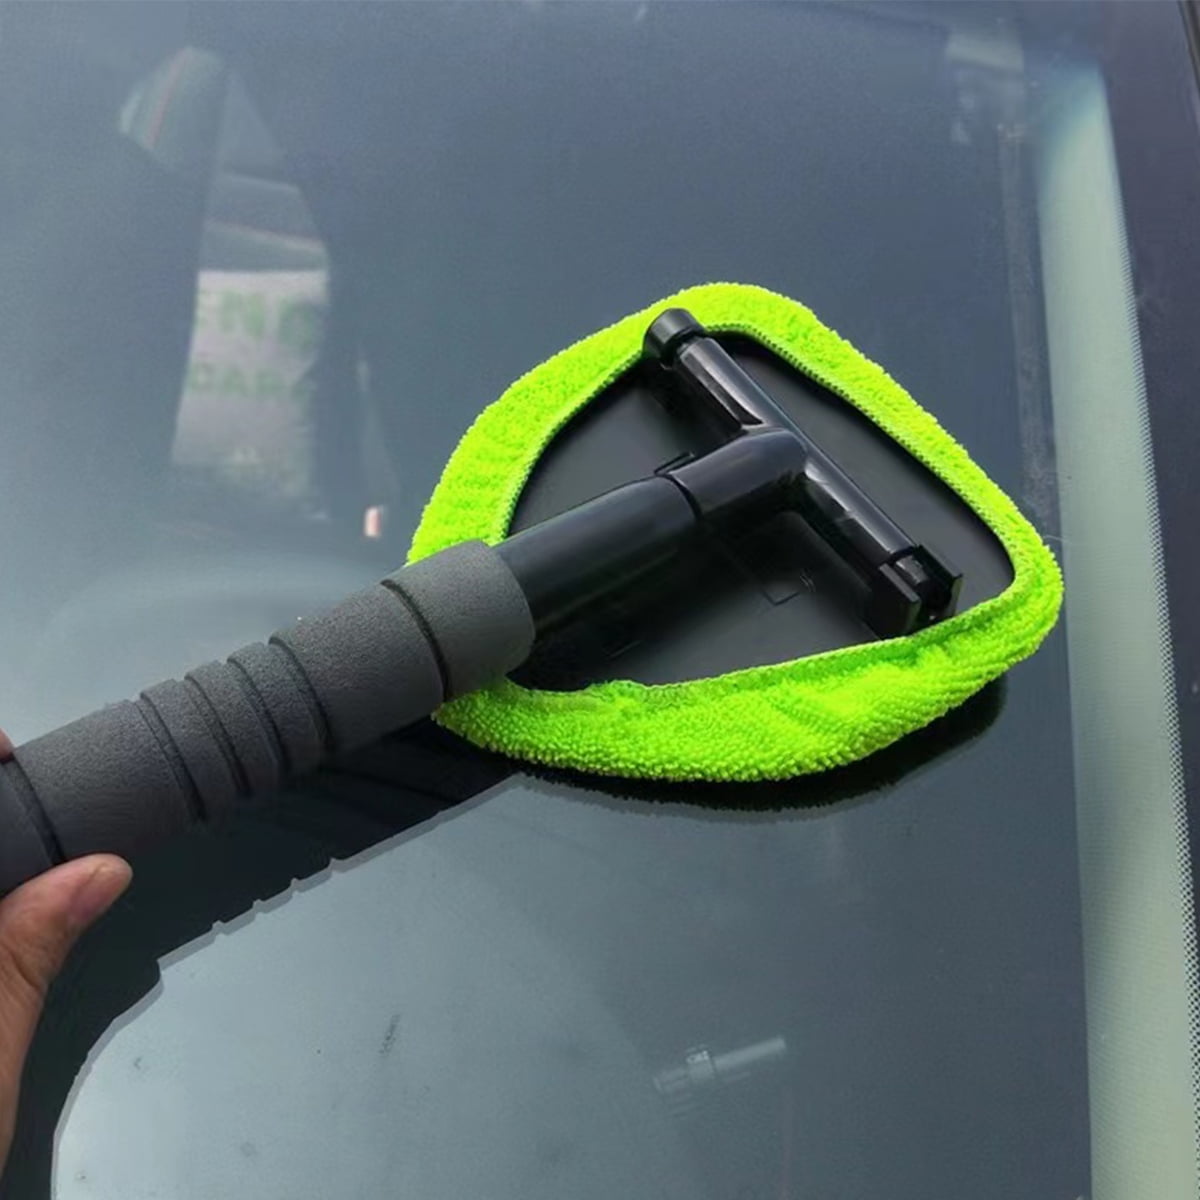 Windshield Cleaner, Car Inside Window Cleaning Tool Microfiber Wand with  Handle Easy Defogger– Set of Windshield Cleaner, Windshield Cleaning Tool 